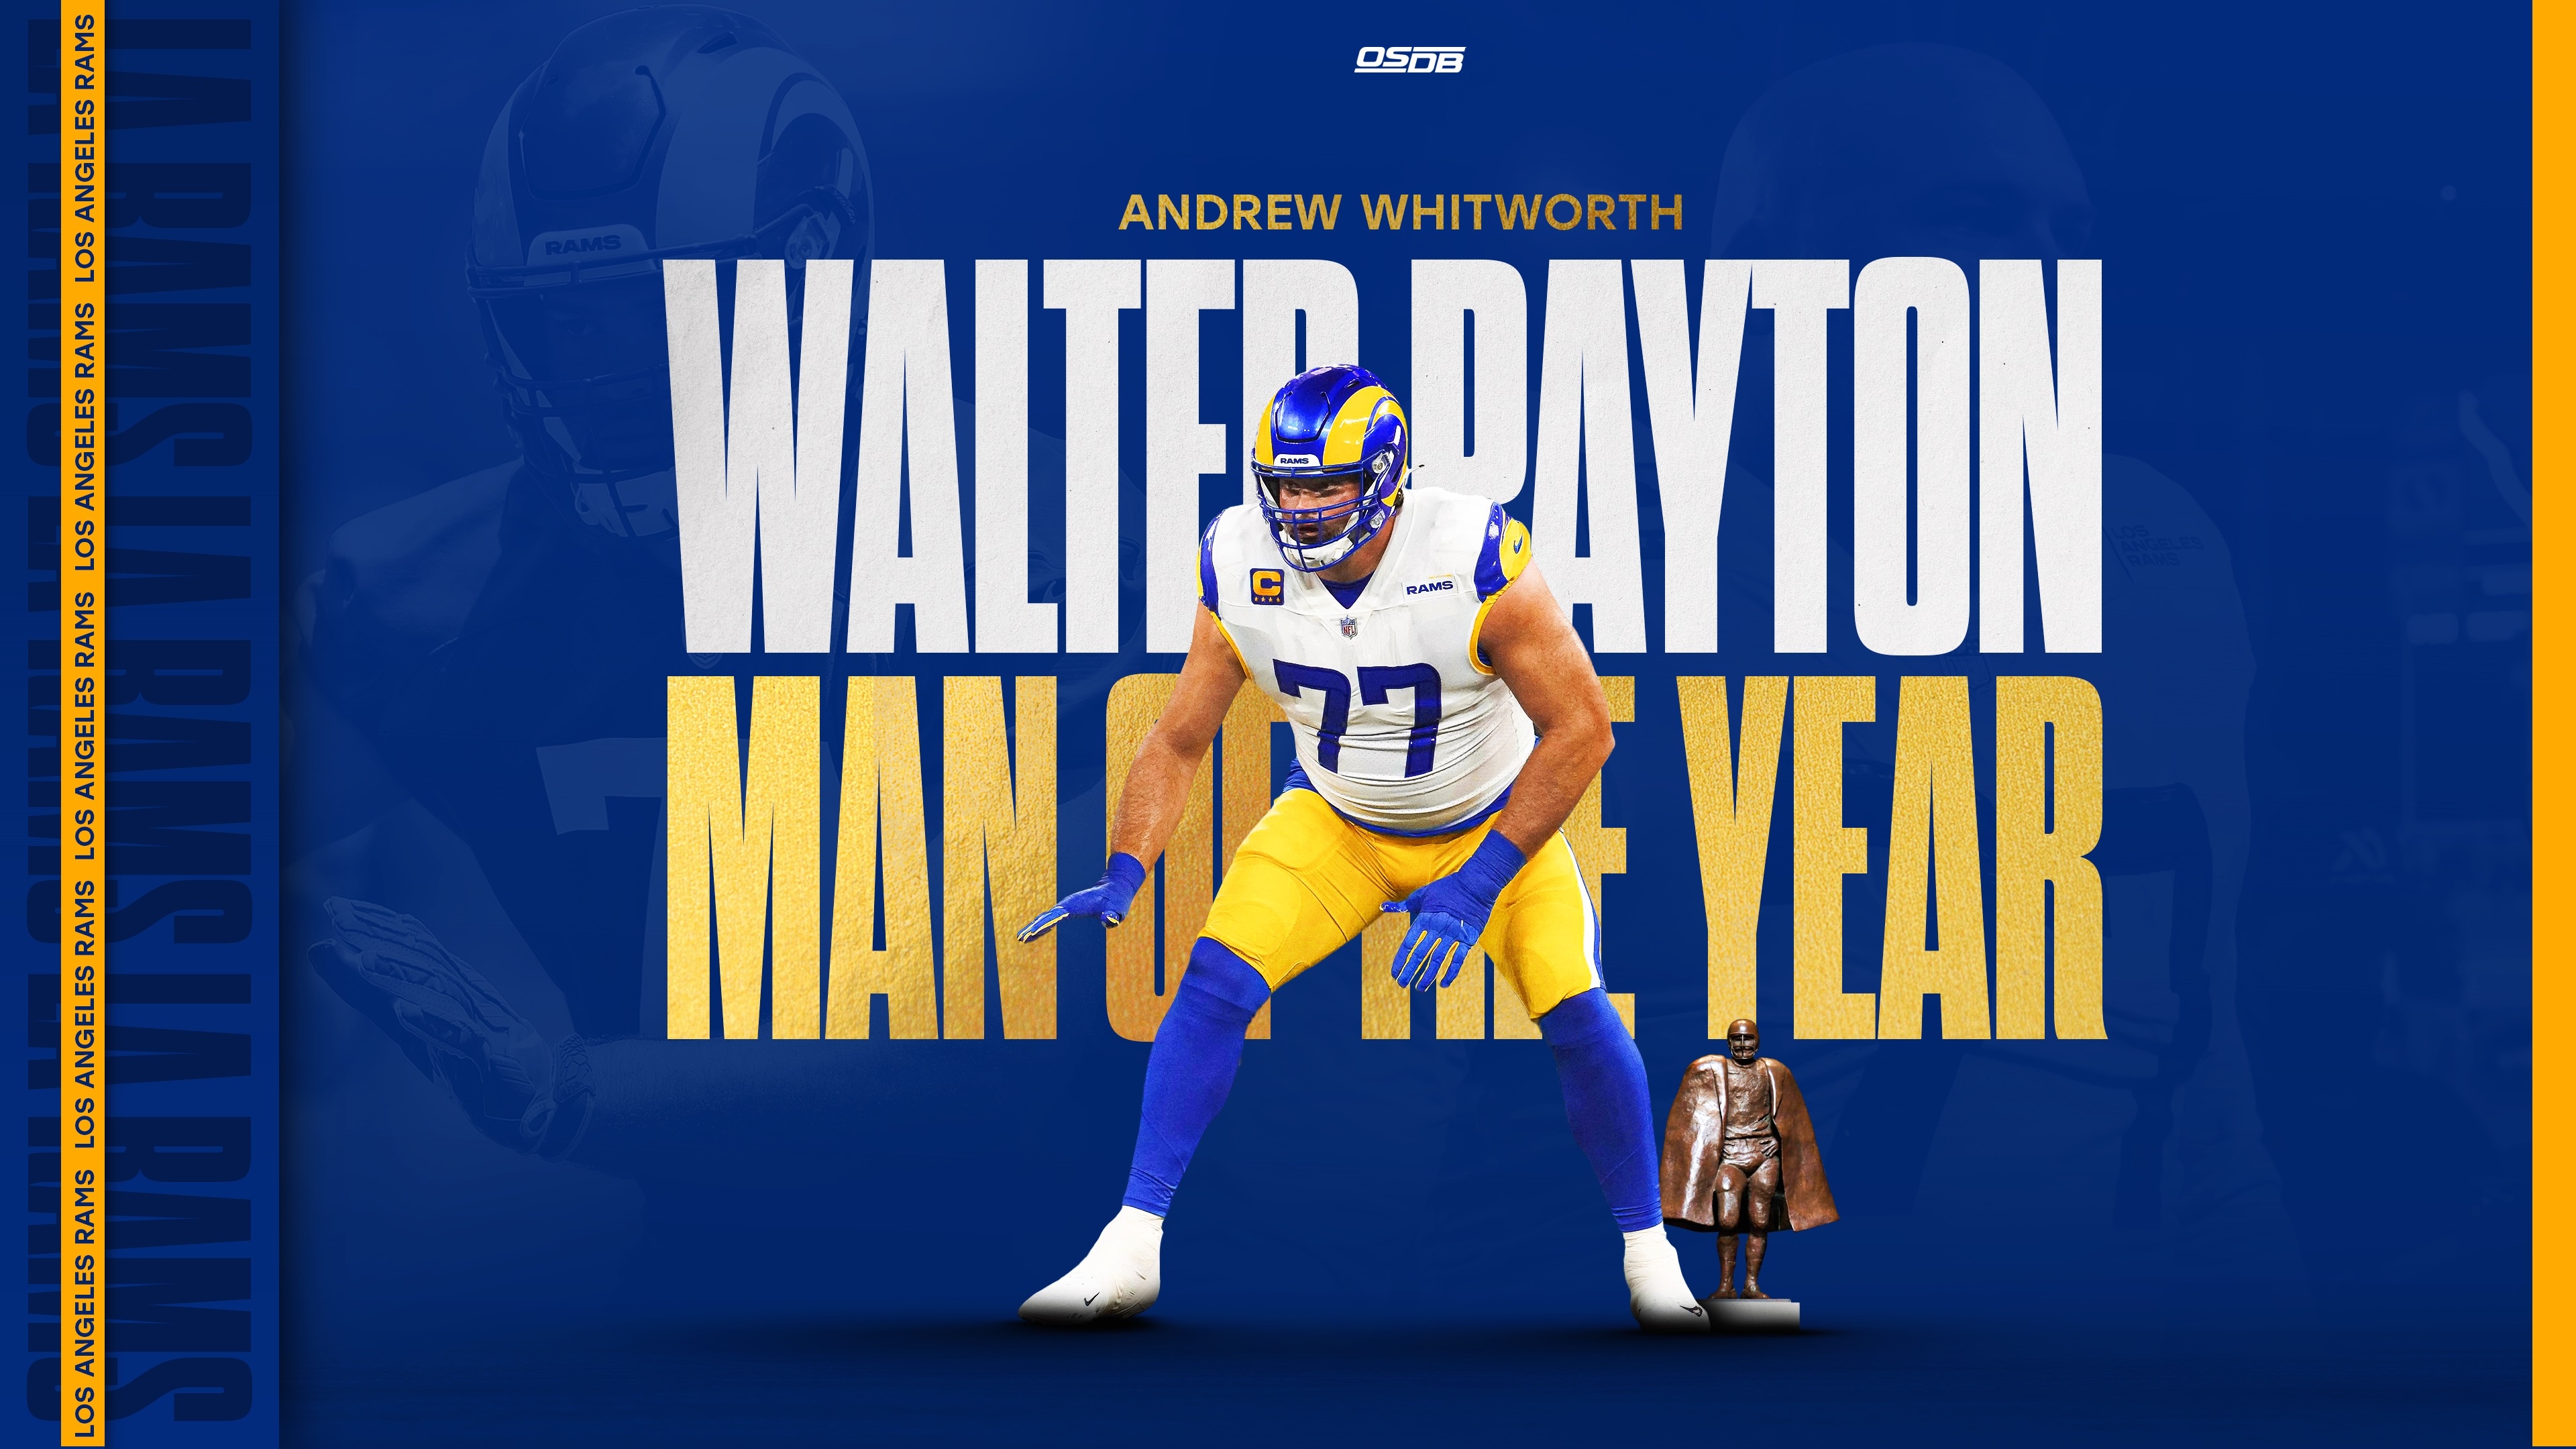 Andrew Whitworth as Walter Payton Man of the Year has a nice ring to it